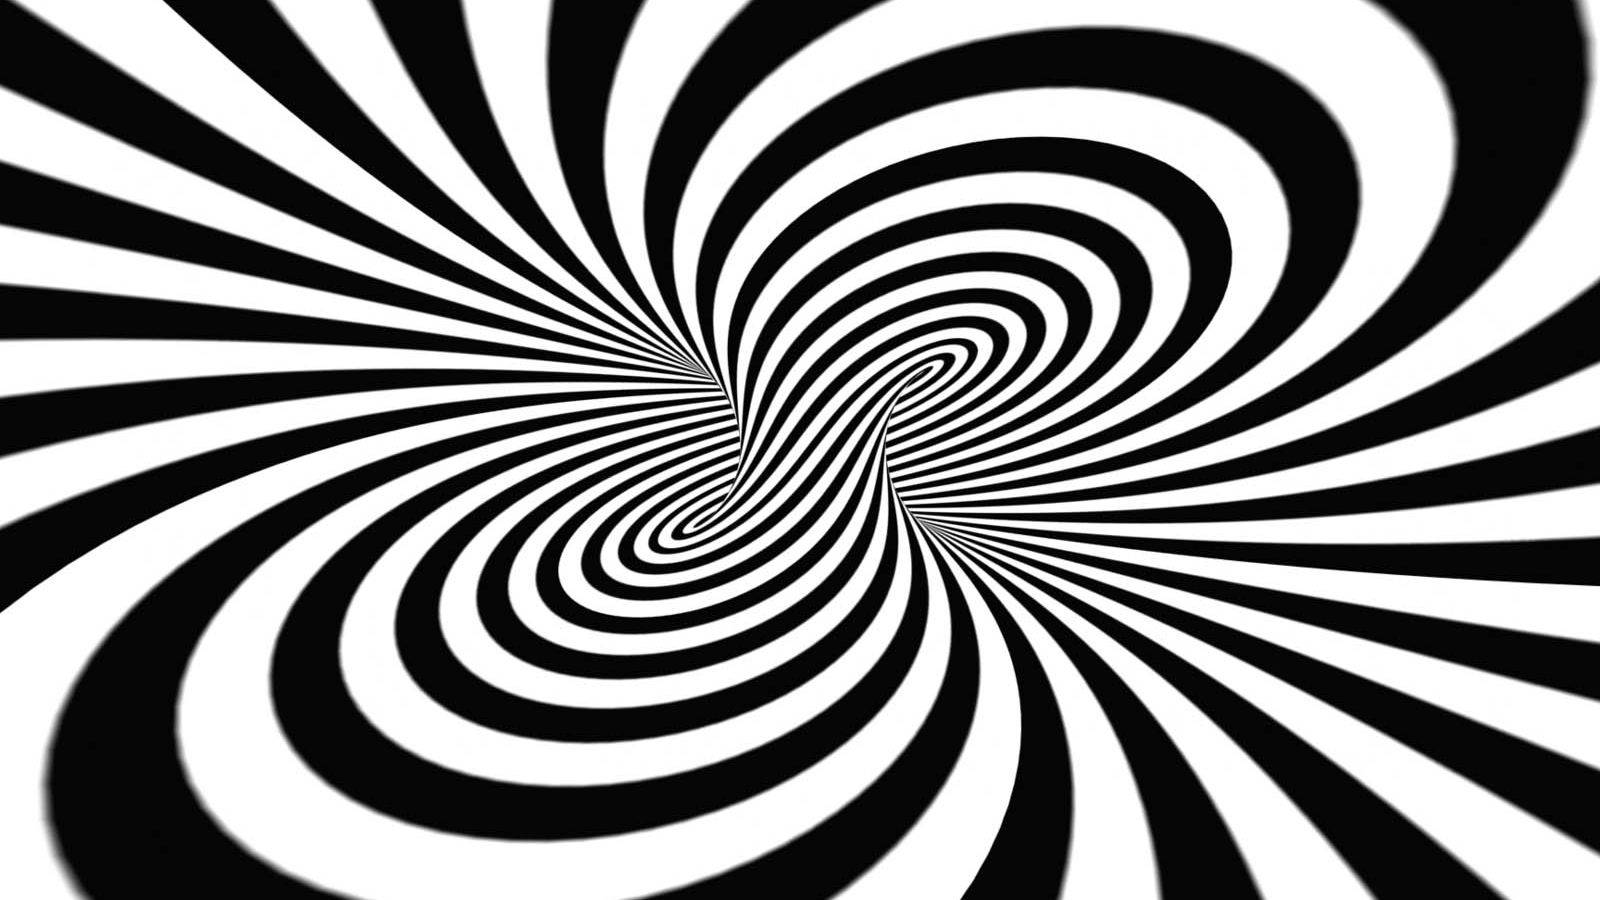 Download Spiral Illusion Art 3d Android Phone Wallpaper 